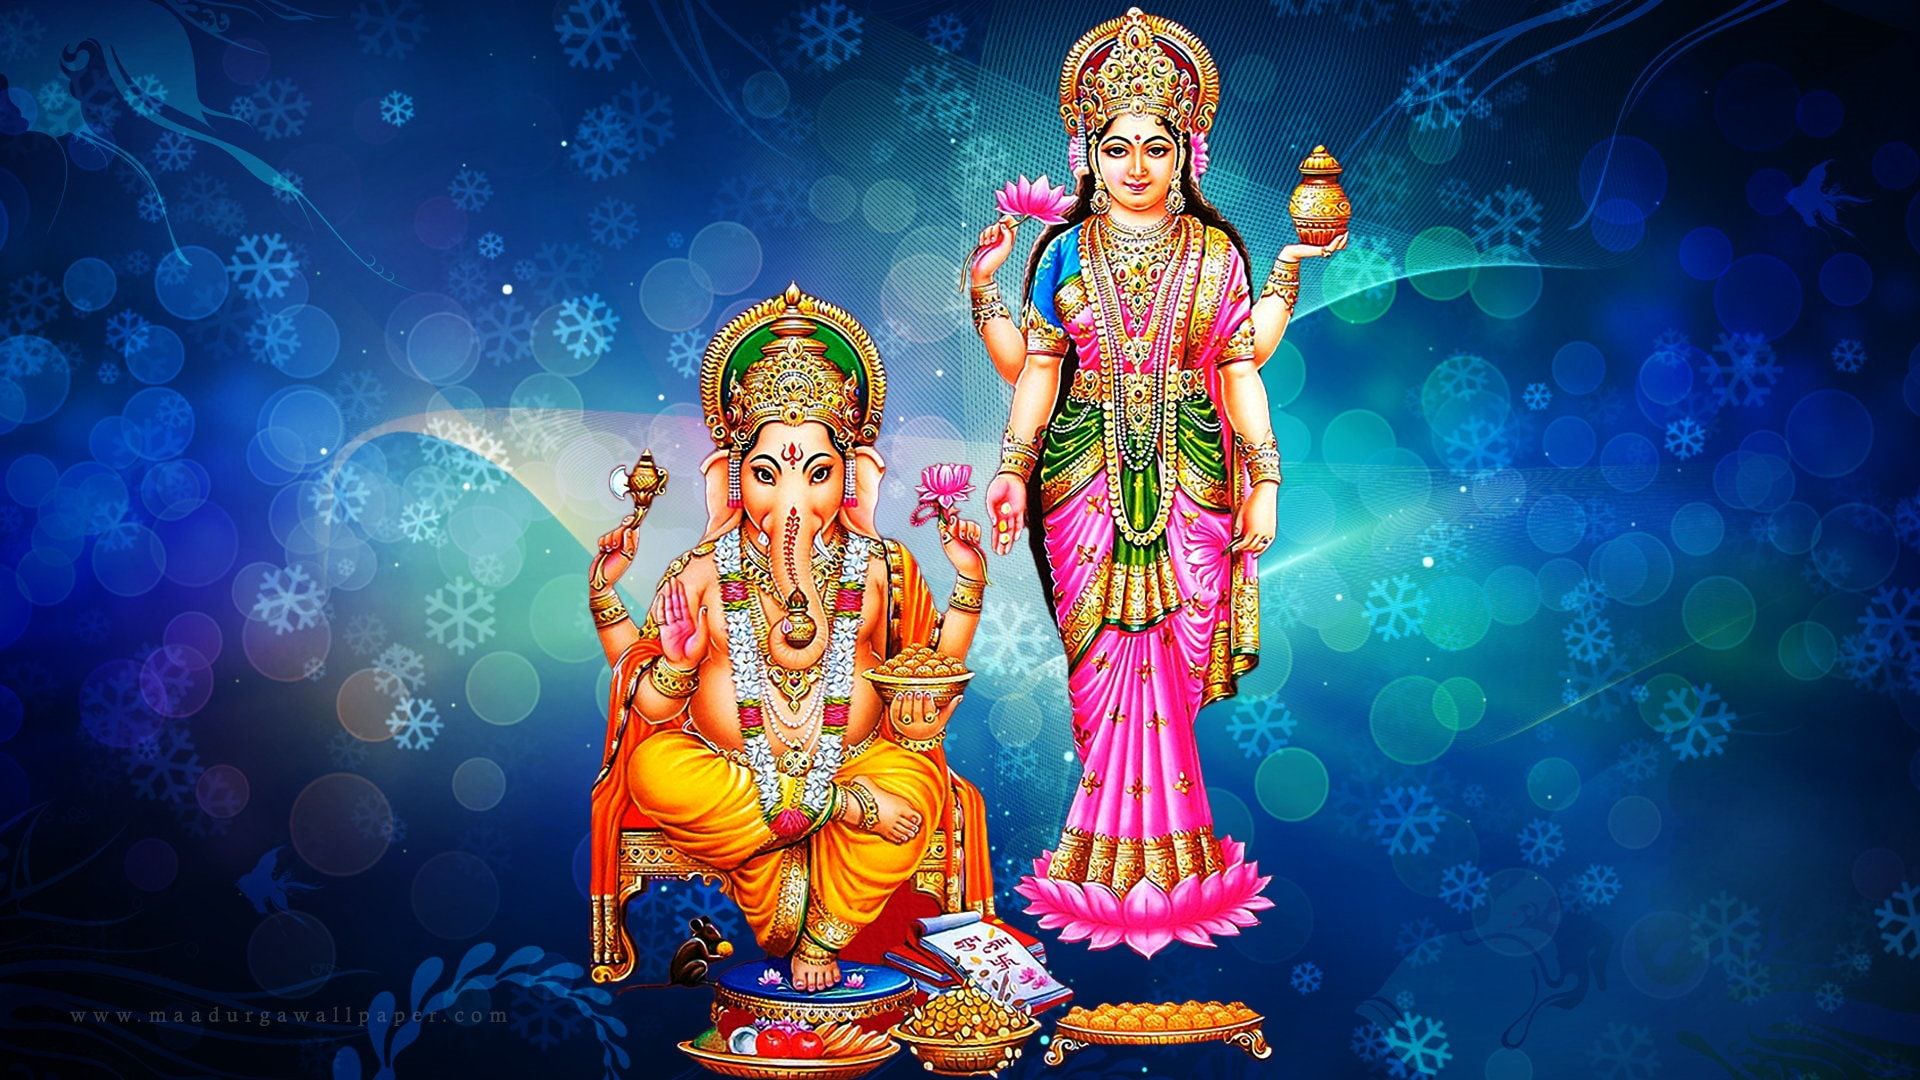 Where To Place Goddess Lakshmi And Lord Ganesha Statue Photos In Your House?